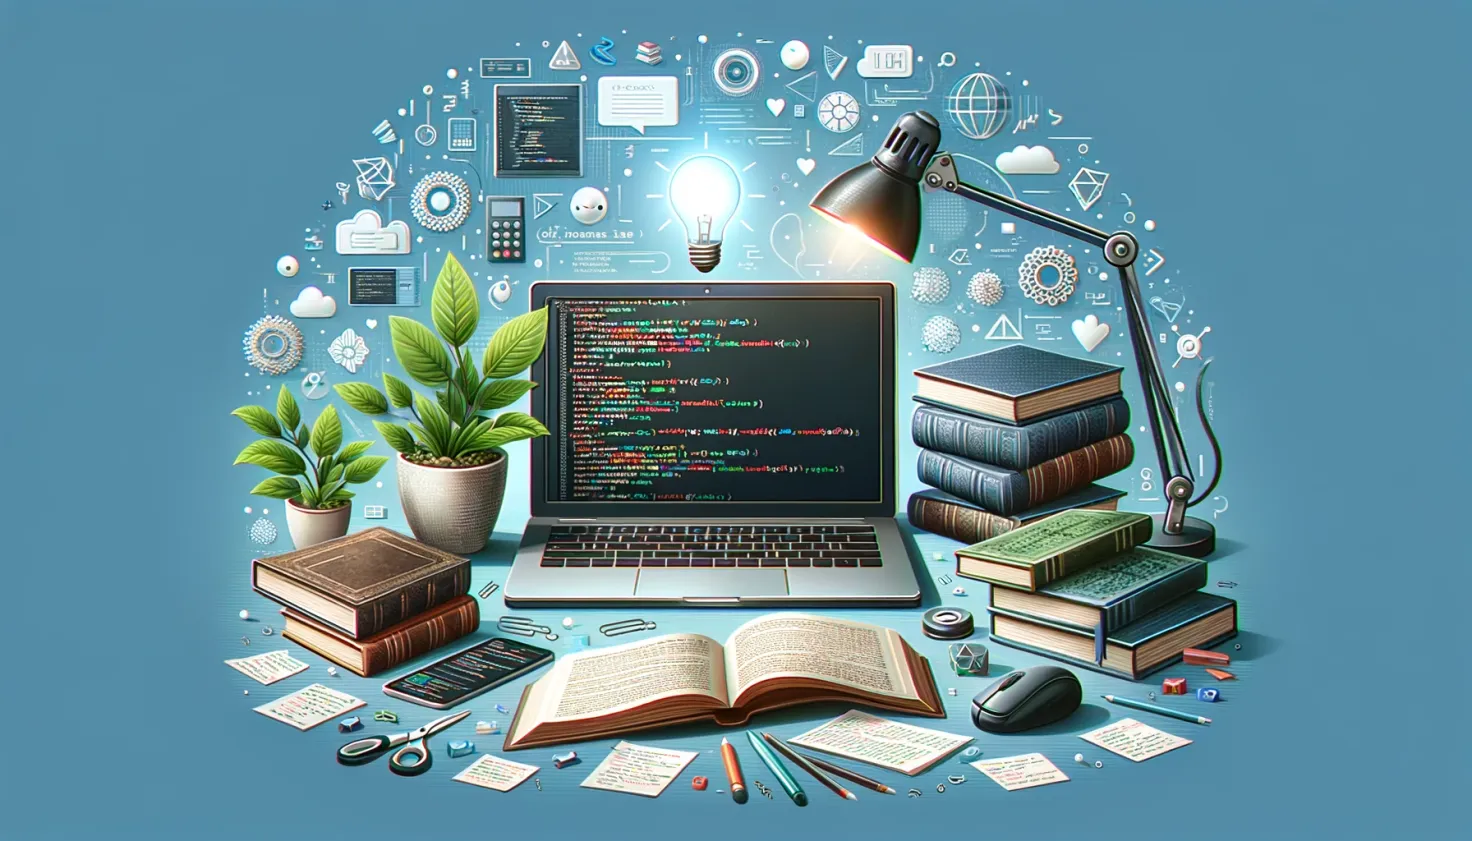 laptop with code on screen, books on software development, plant growing, light bulb symbolizing idea